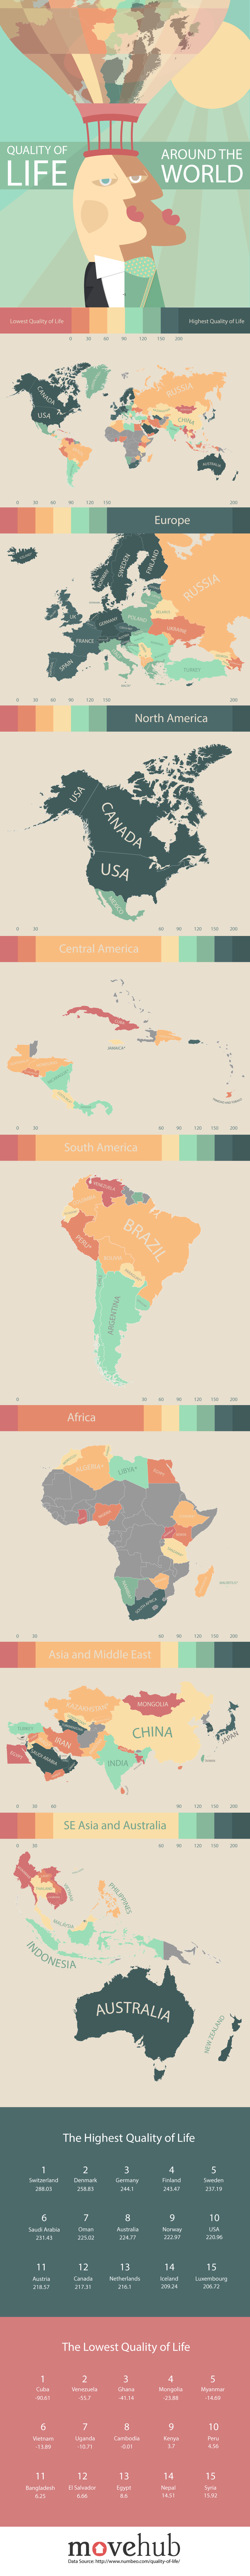 Mapping the Quality of Life Around the World